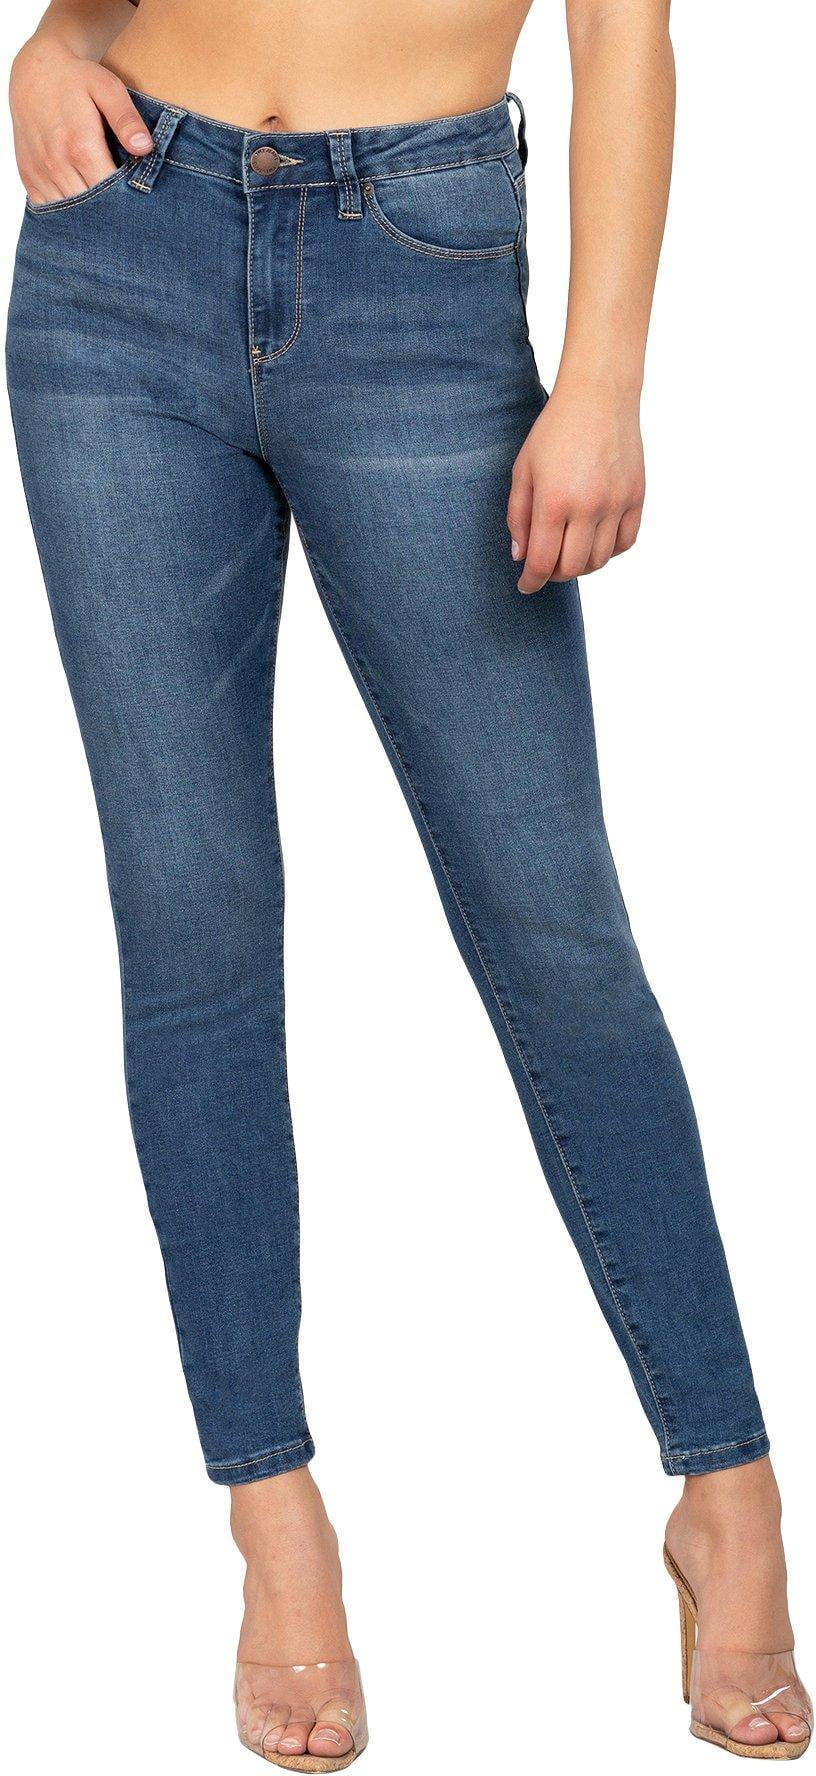 skinny jeans muffin top